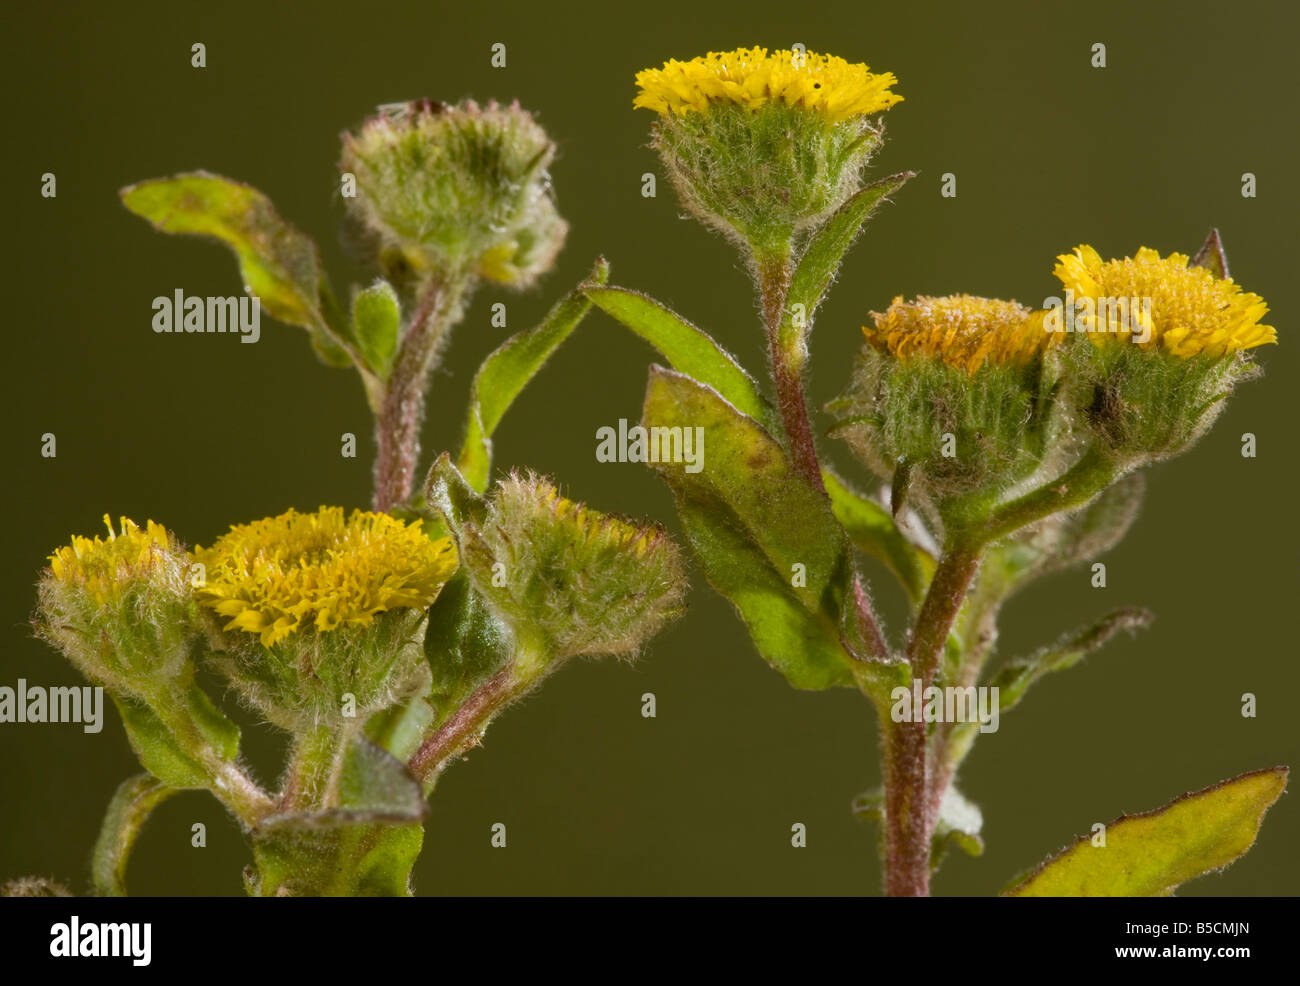 Rare Plant High Resolution Stock Photography and Images Alamy